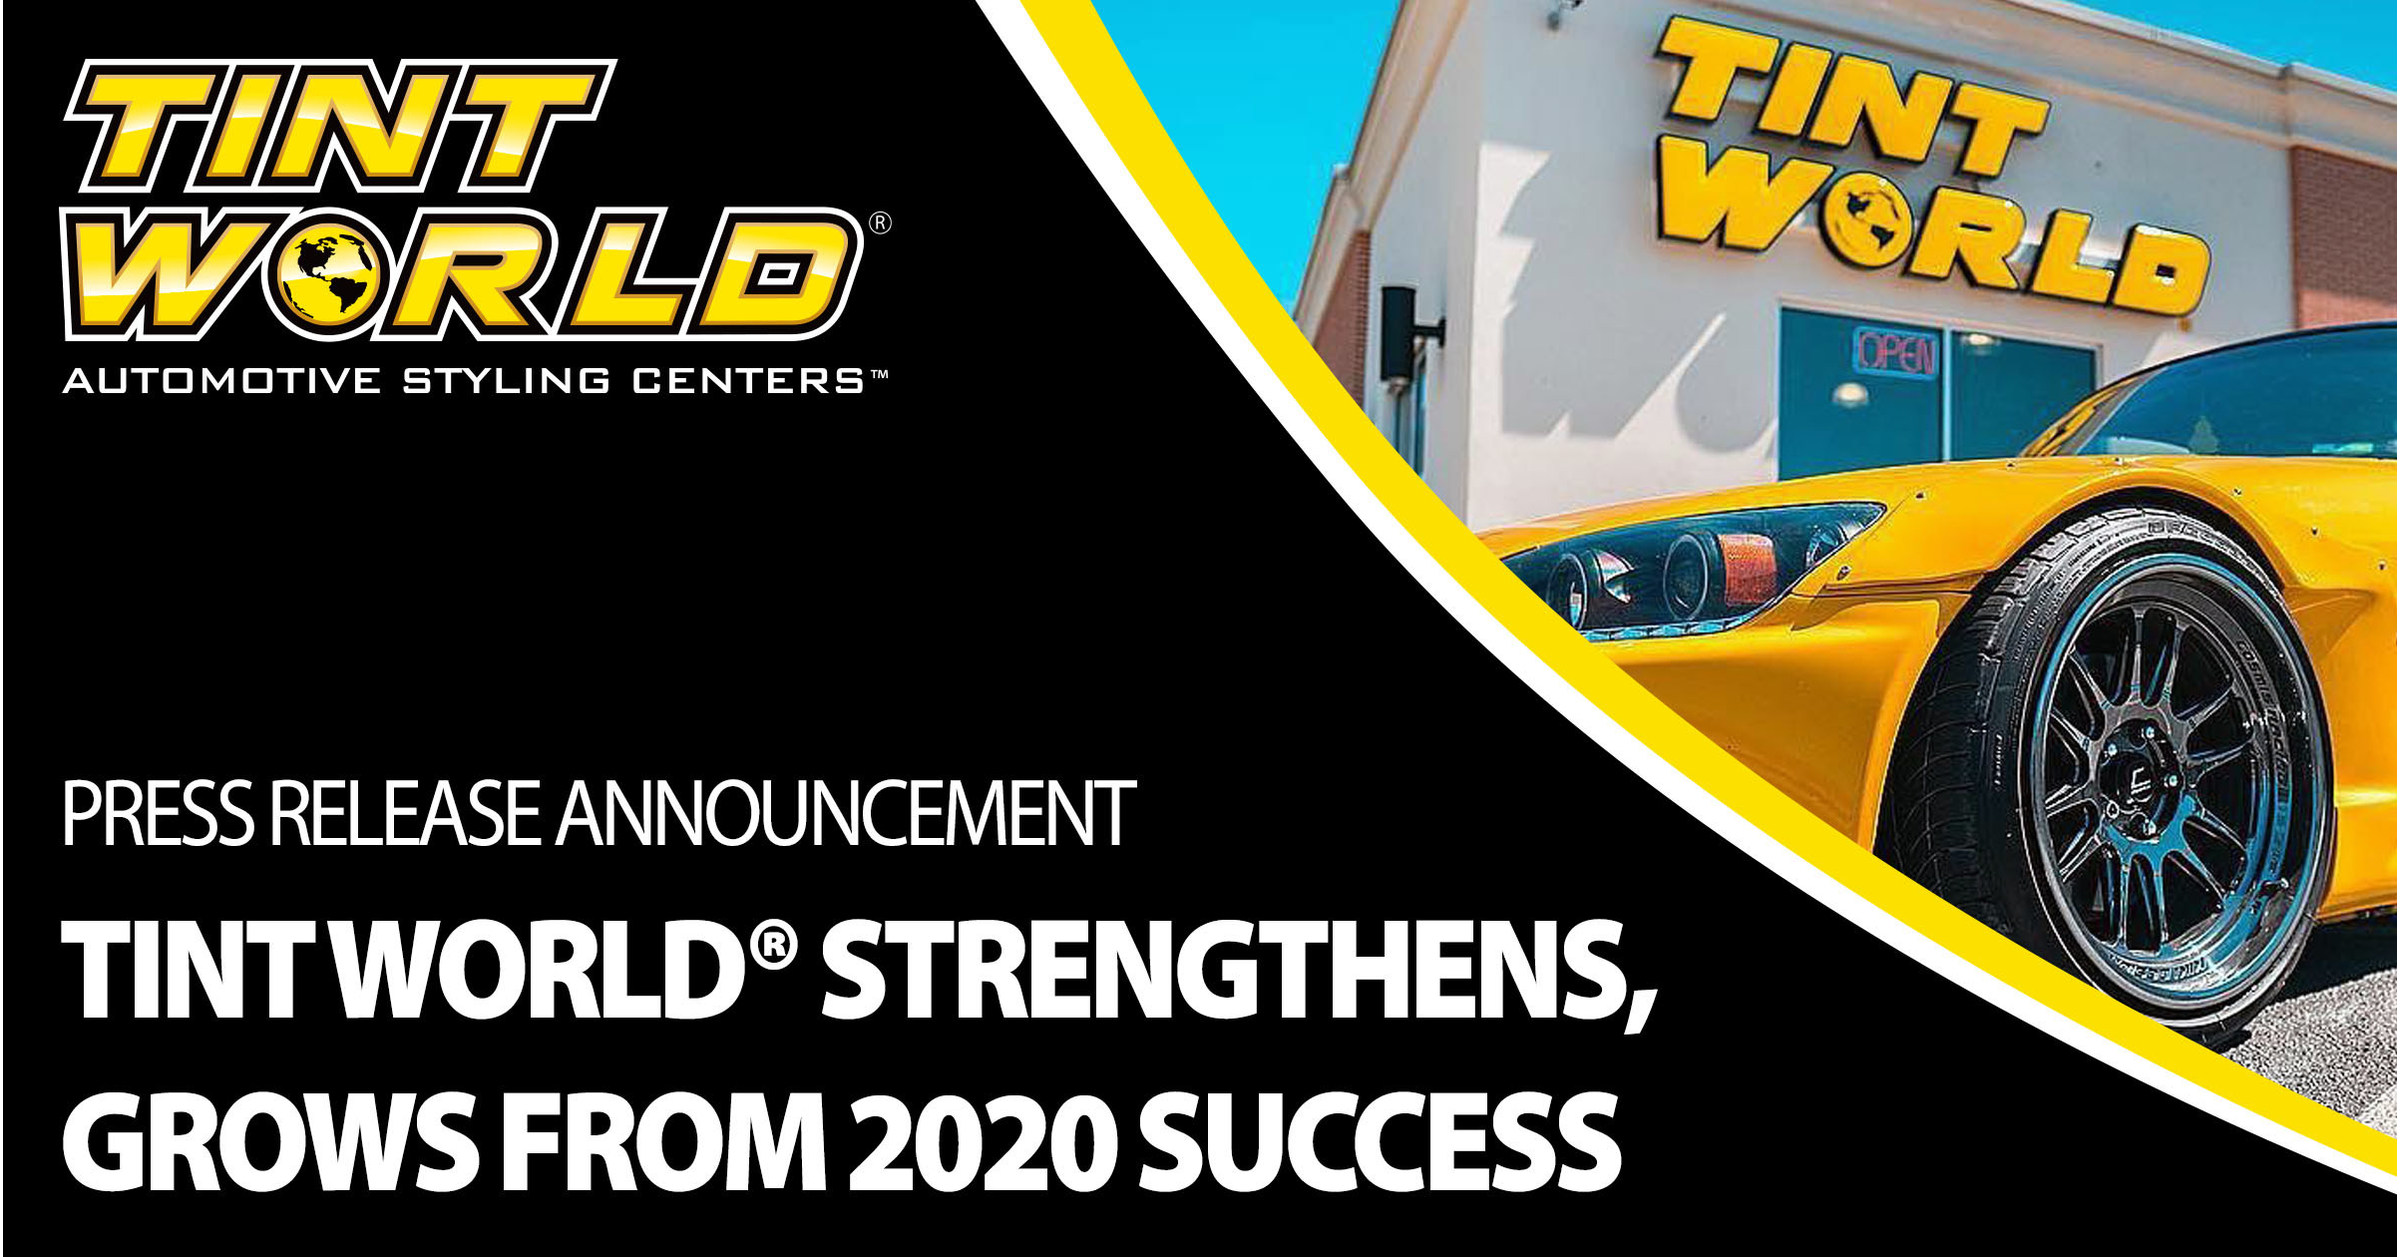 Tint World® builds franchise development strategy from 2020 success